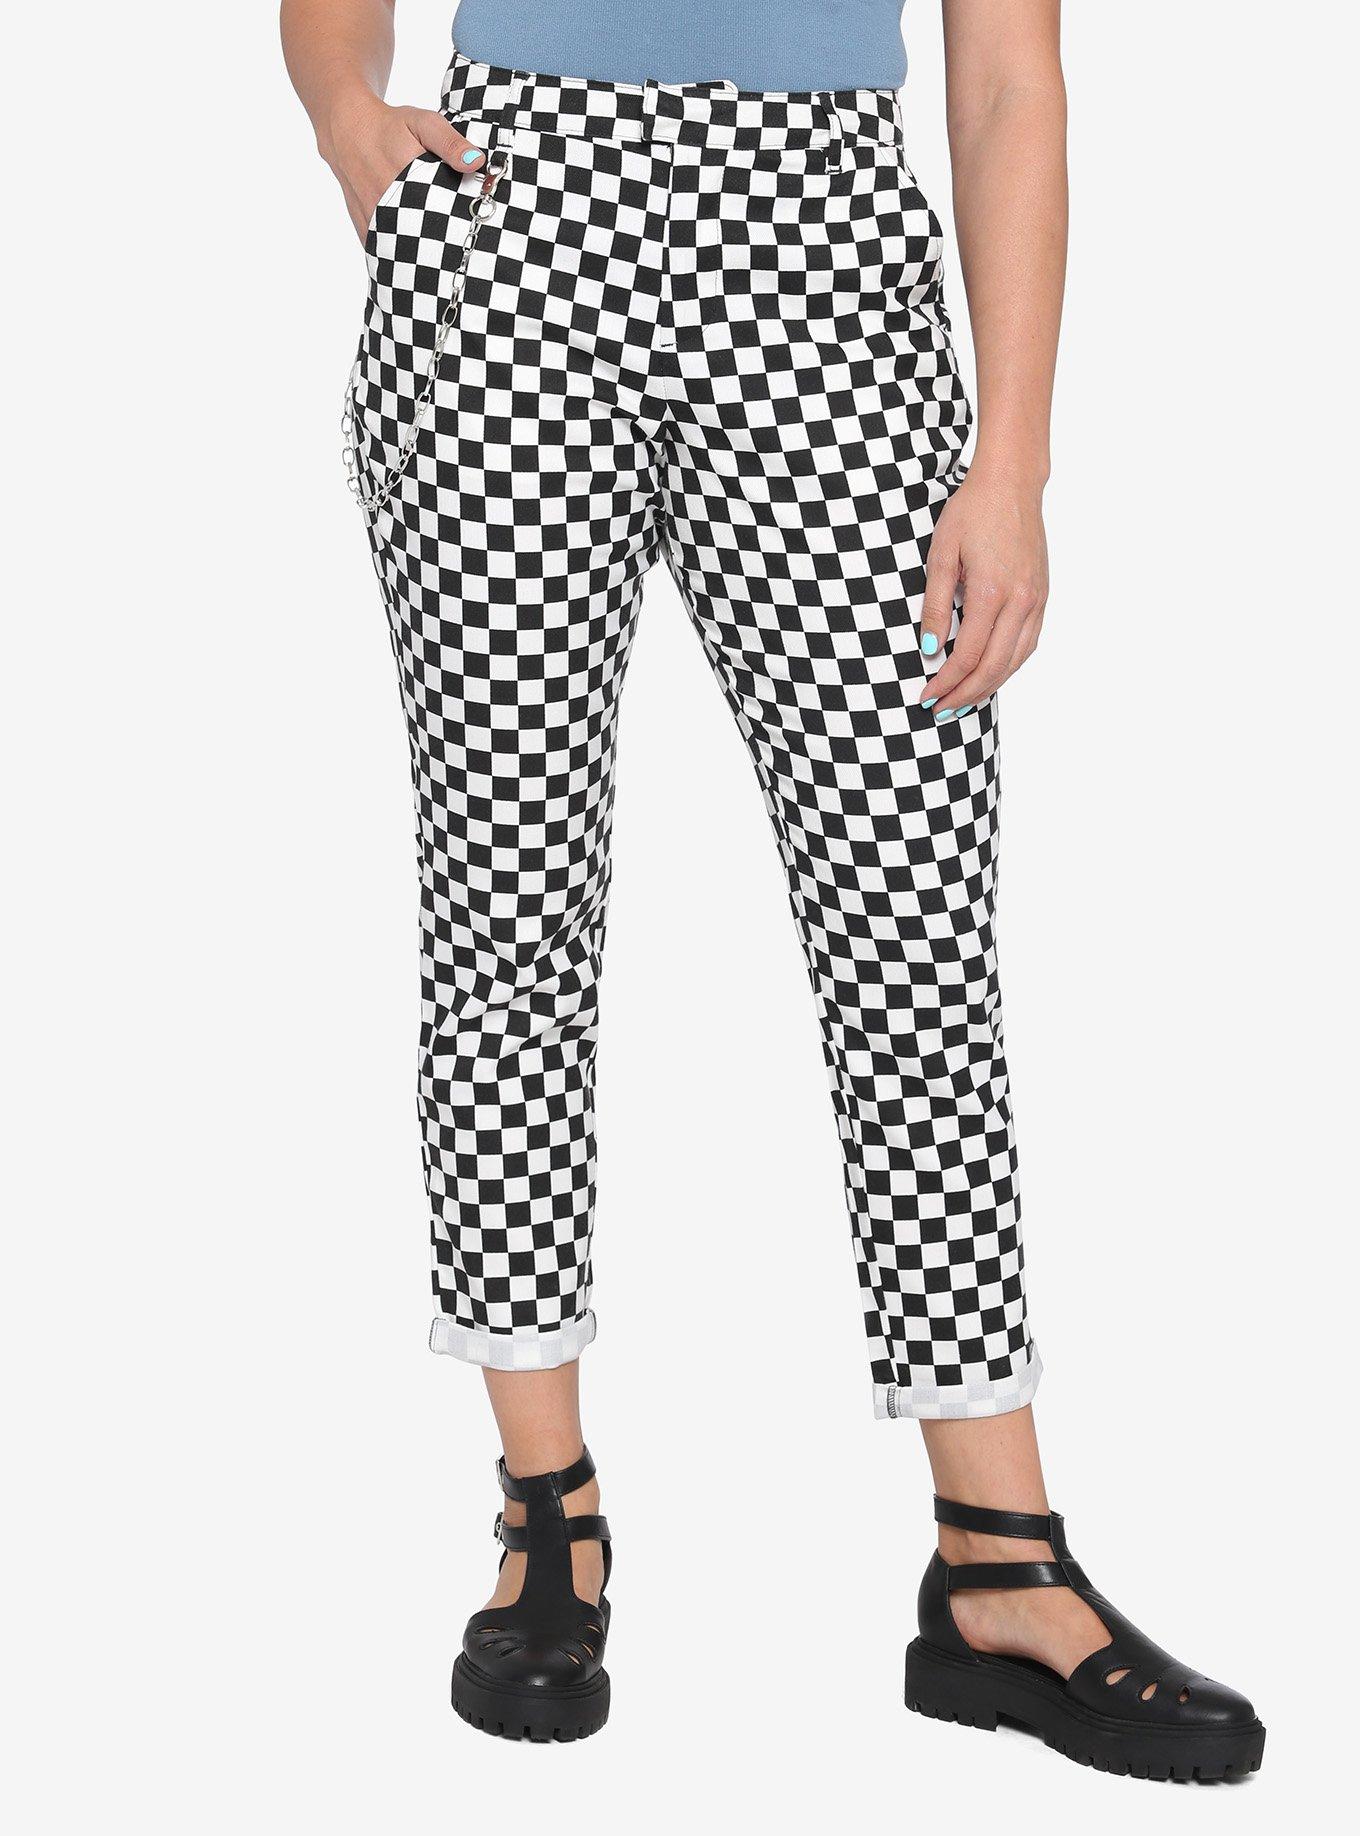 Black & White Checkered Pants With Detachable Chain, MULTI, hi-res